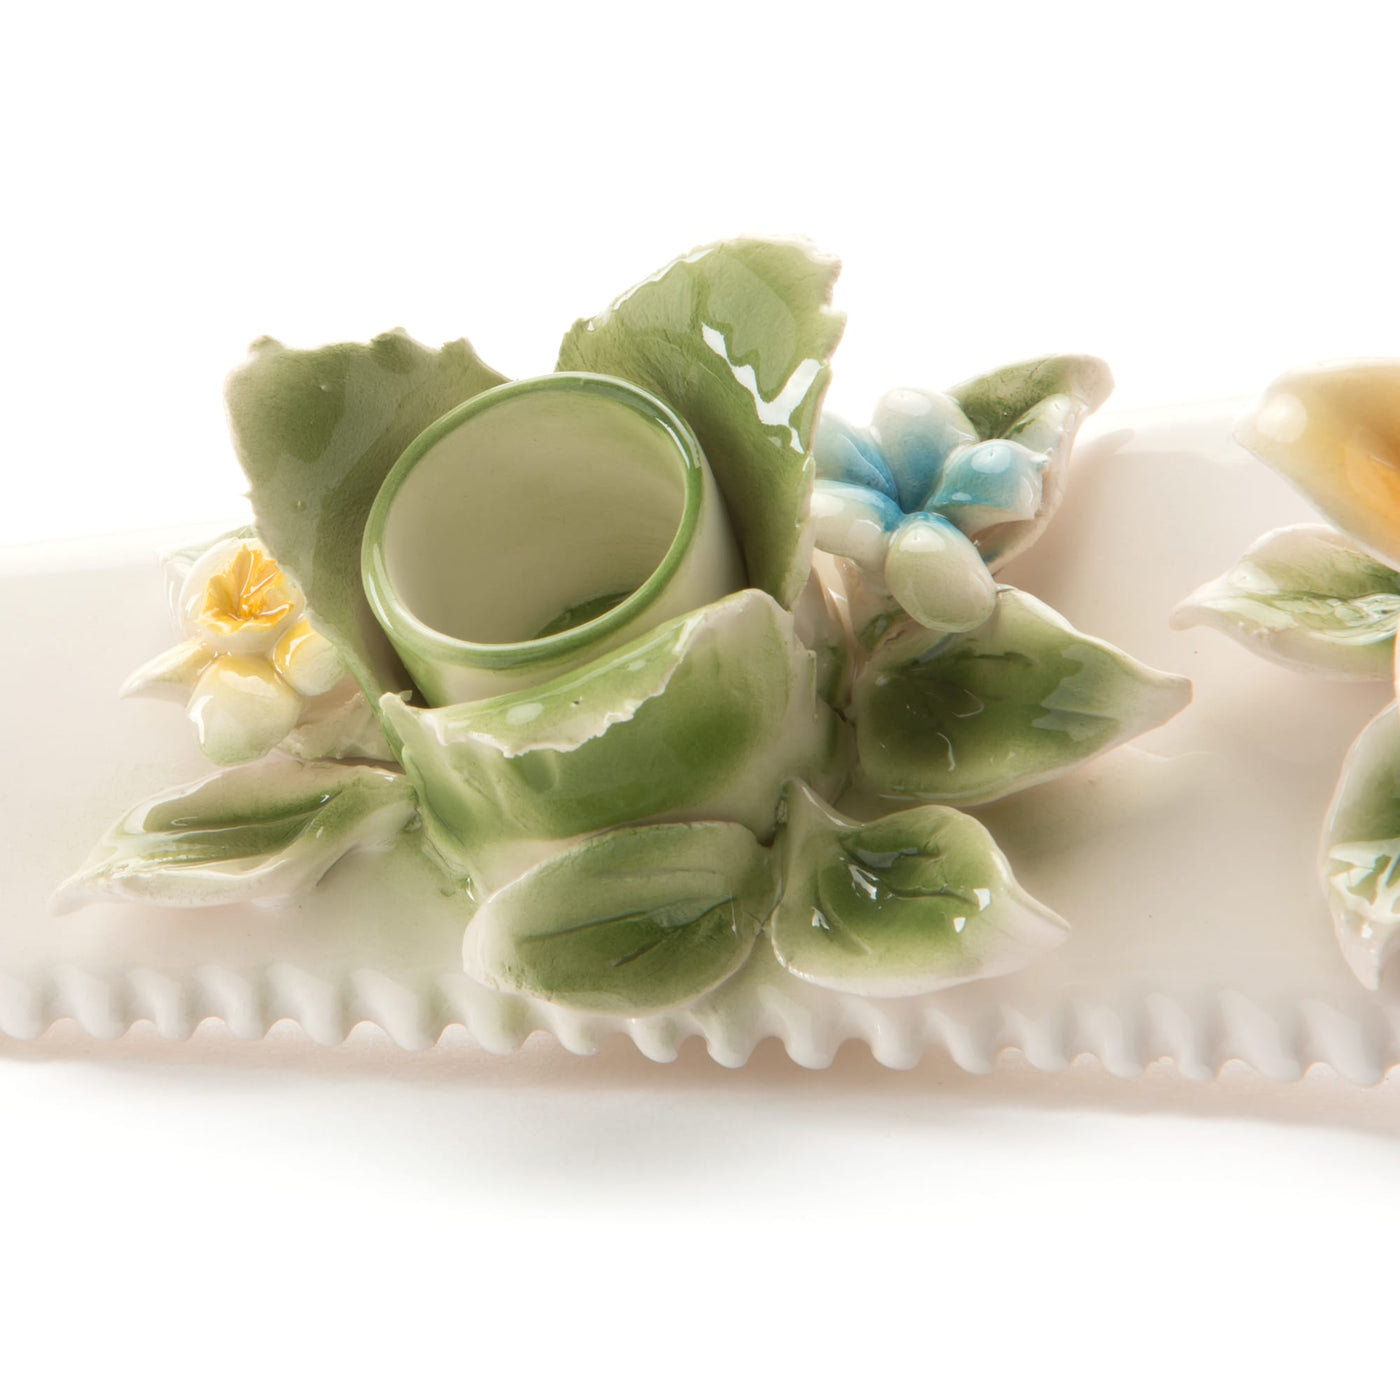 The Saw Ceramic Flower Candle Holder by Seletti